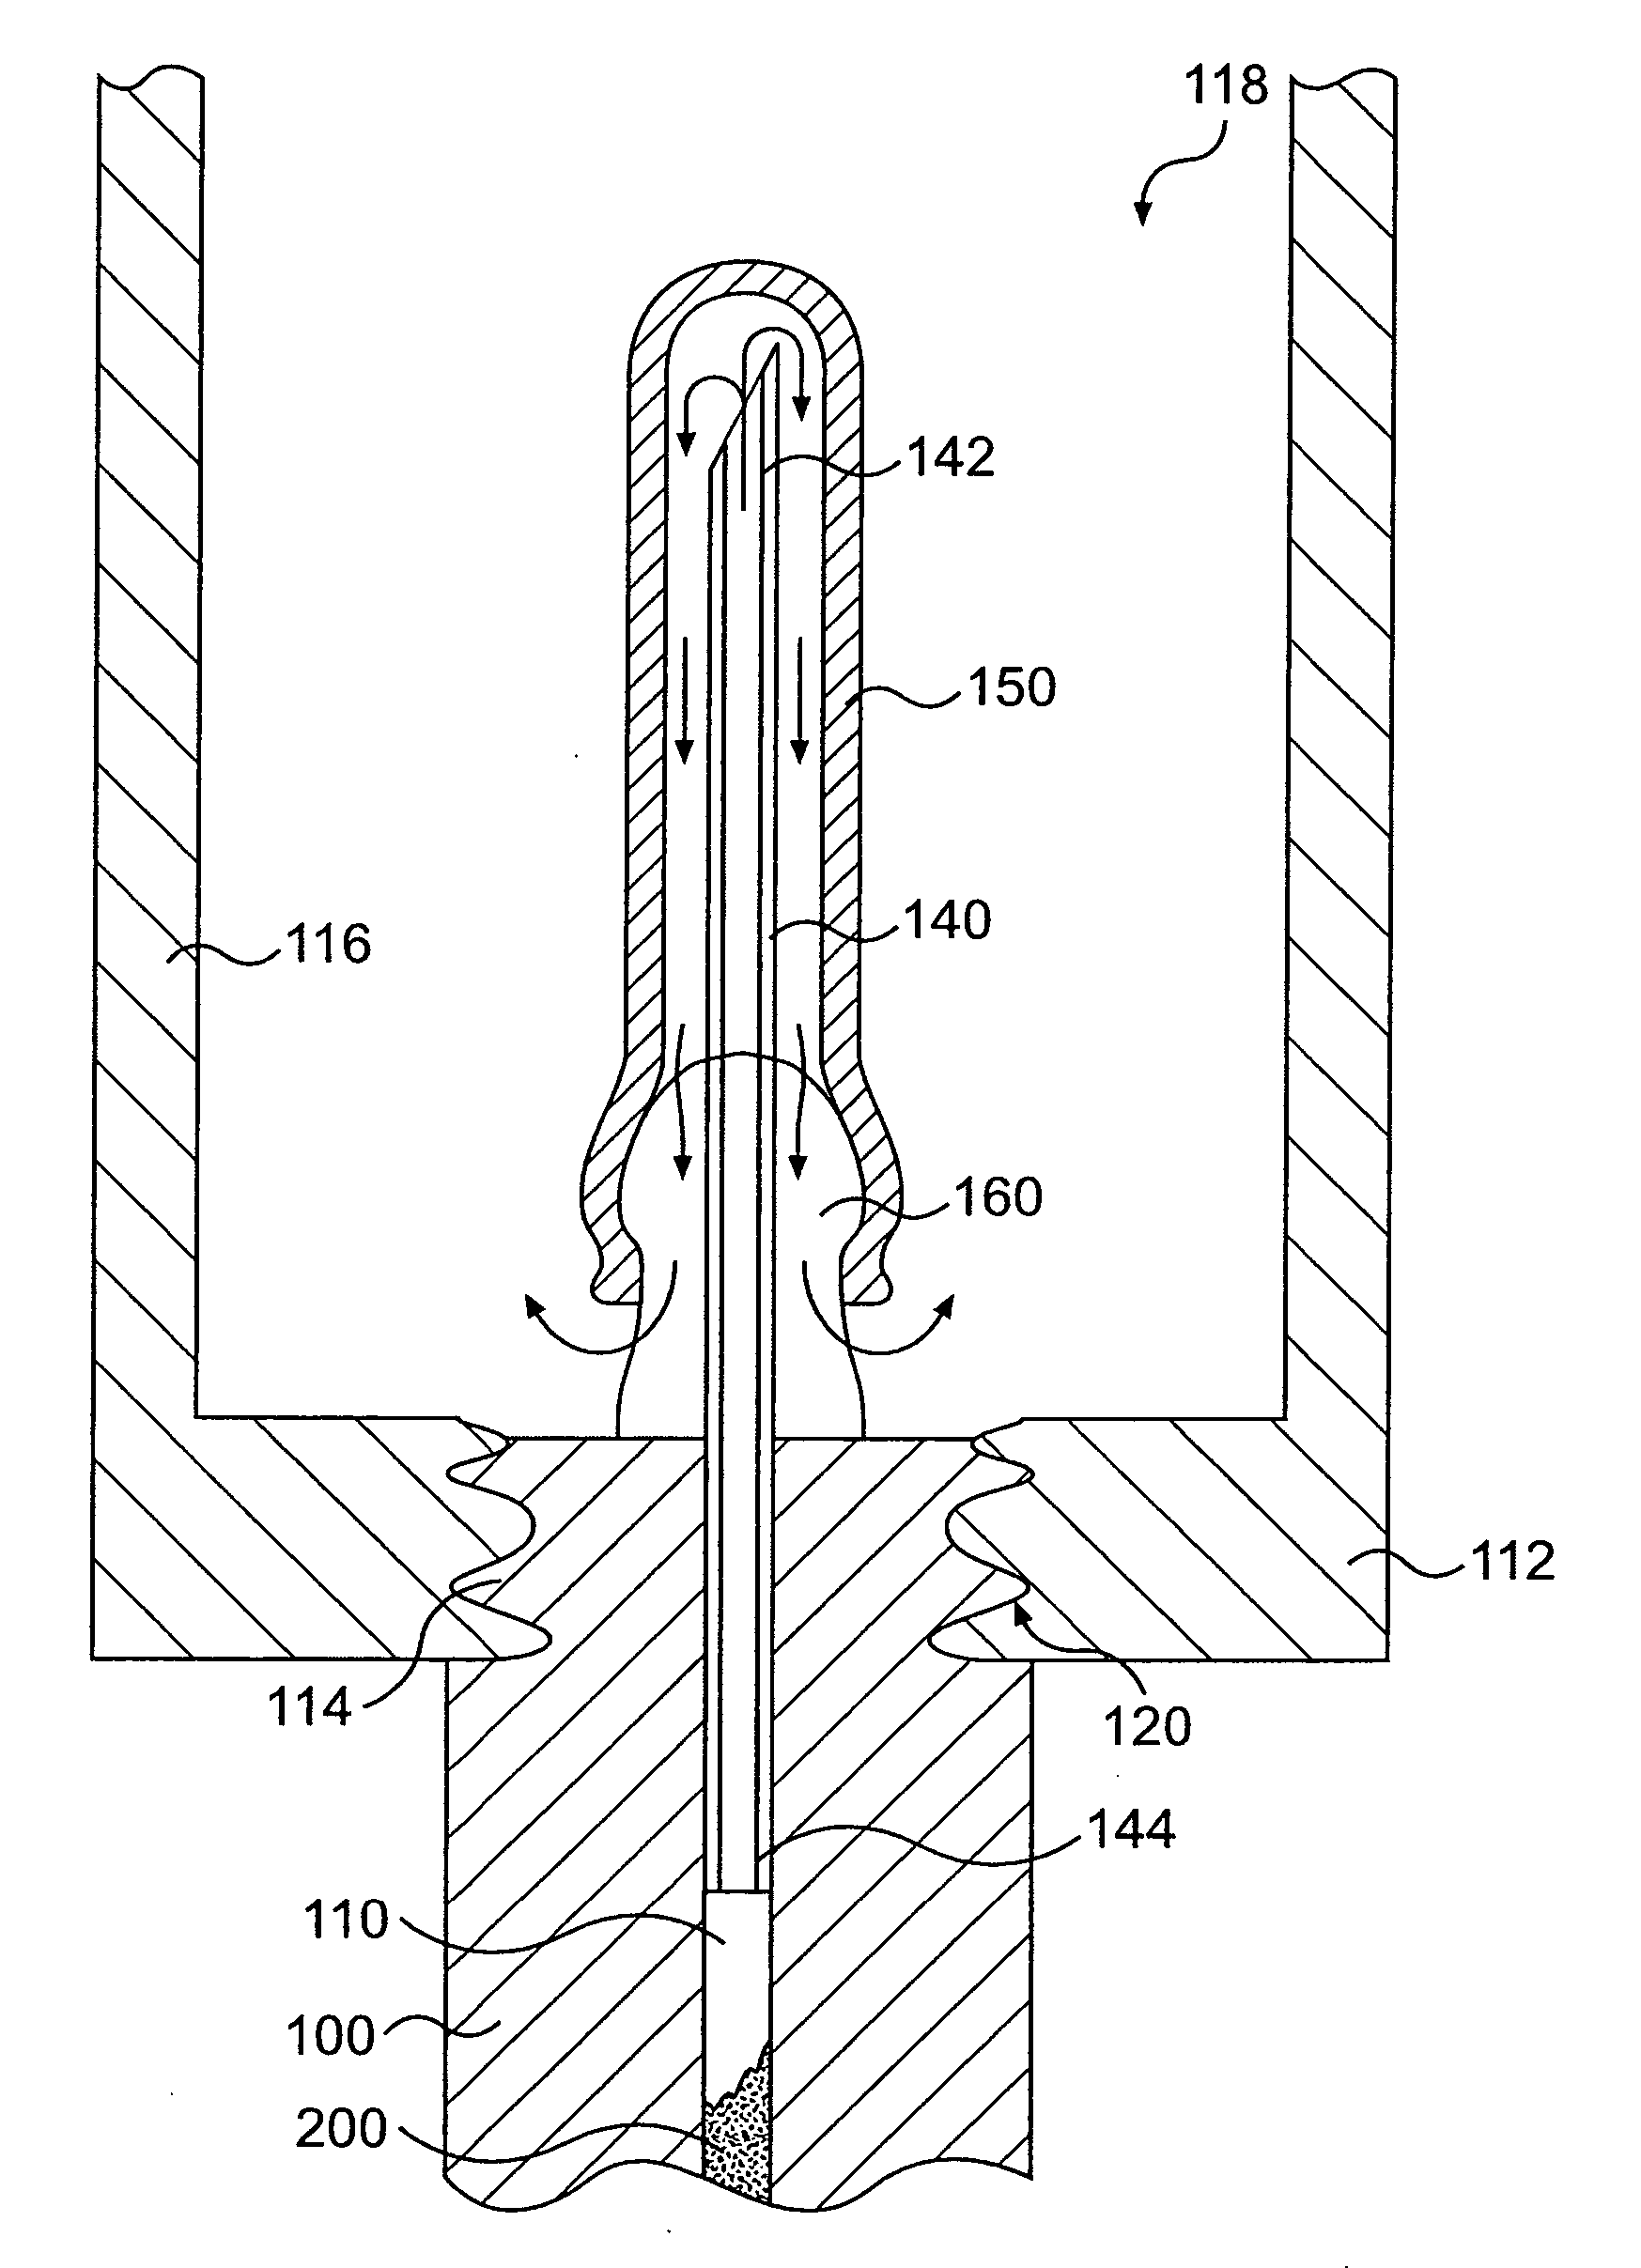 Blood drawing device with flash detction